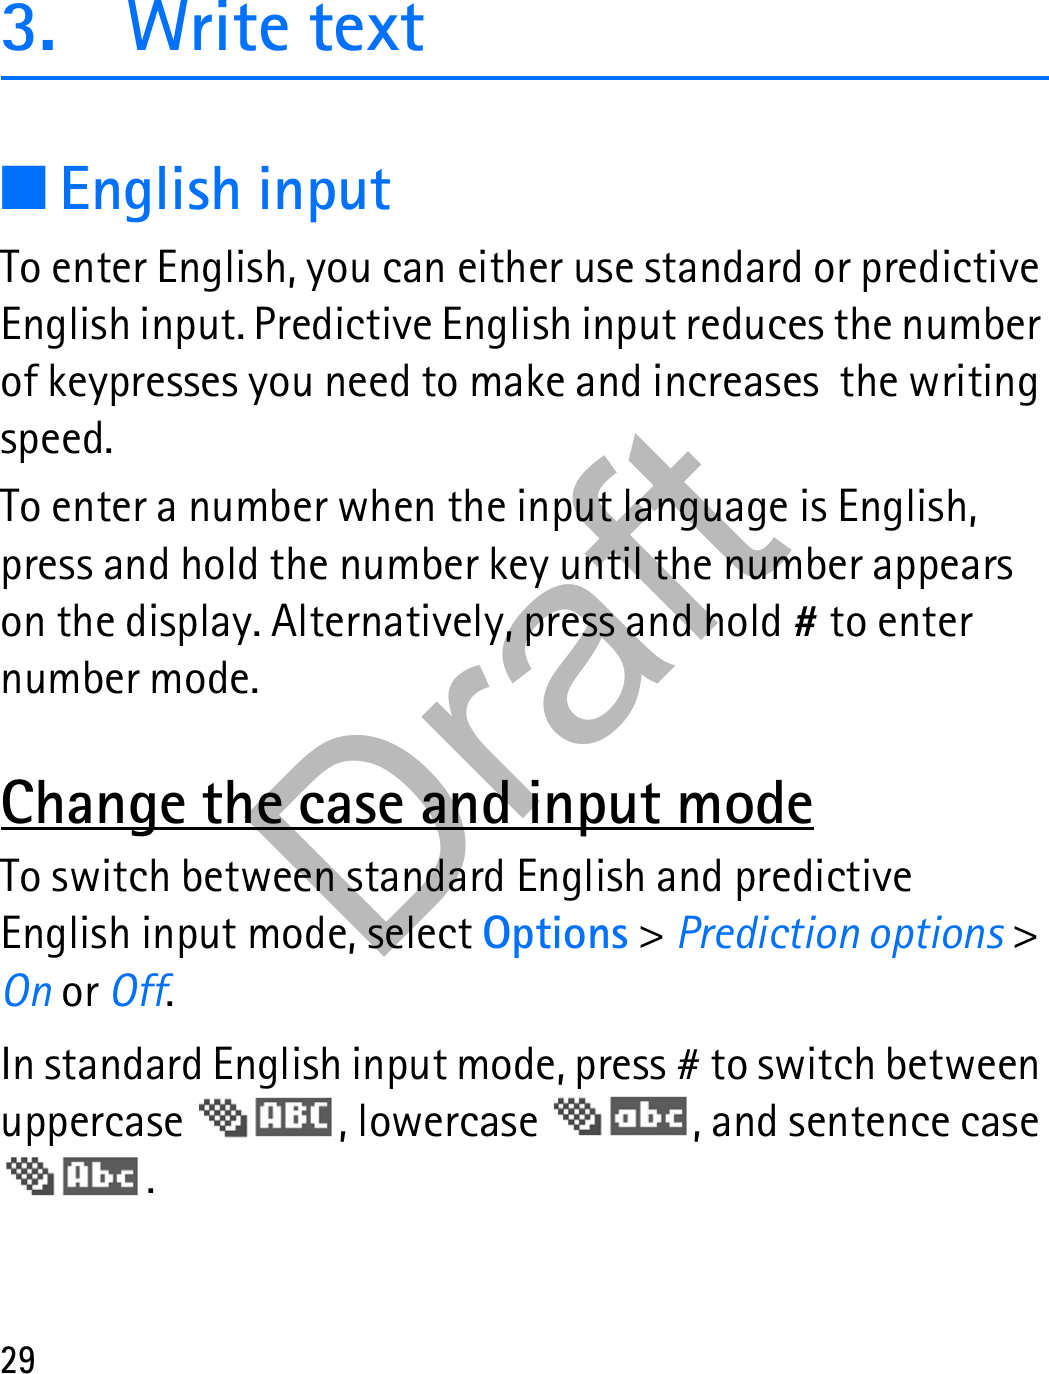 293. Write text■English inputTo enter English, you can either use standard or predictive English input. Predictive English input reduces the number of keypresses you need to make and increases  the writing speed.To enter a number when the input language is English, press and hold the number key until the number appears on the display. Alternatively, press and hold # to enter number mode.Change the case and input modeTo switch between standard English and predictive English input mode, select Options &gt; Prediction options &gt; On or Off.In standard English input mode, press # to switch between uppercase  , lowercase  , and sentence case . Draft